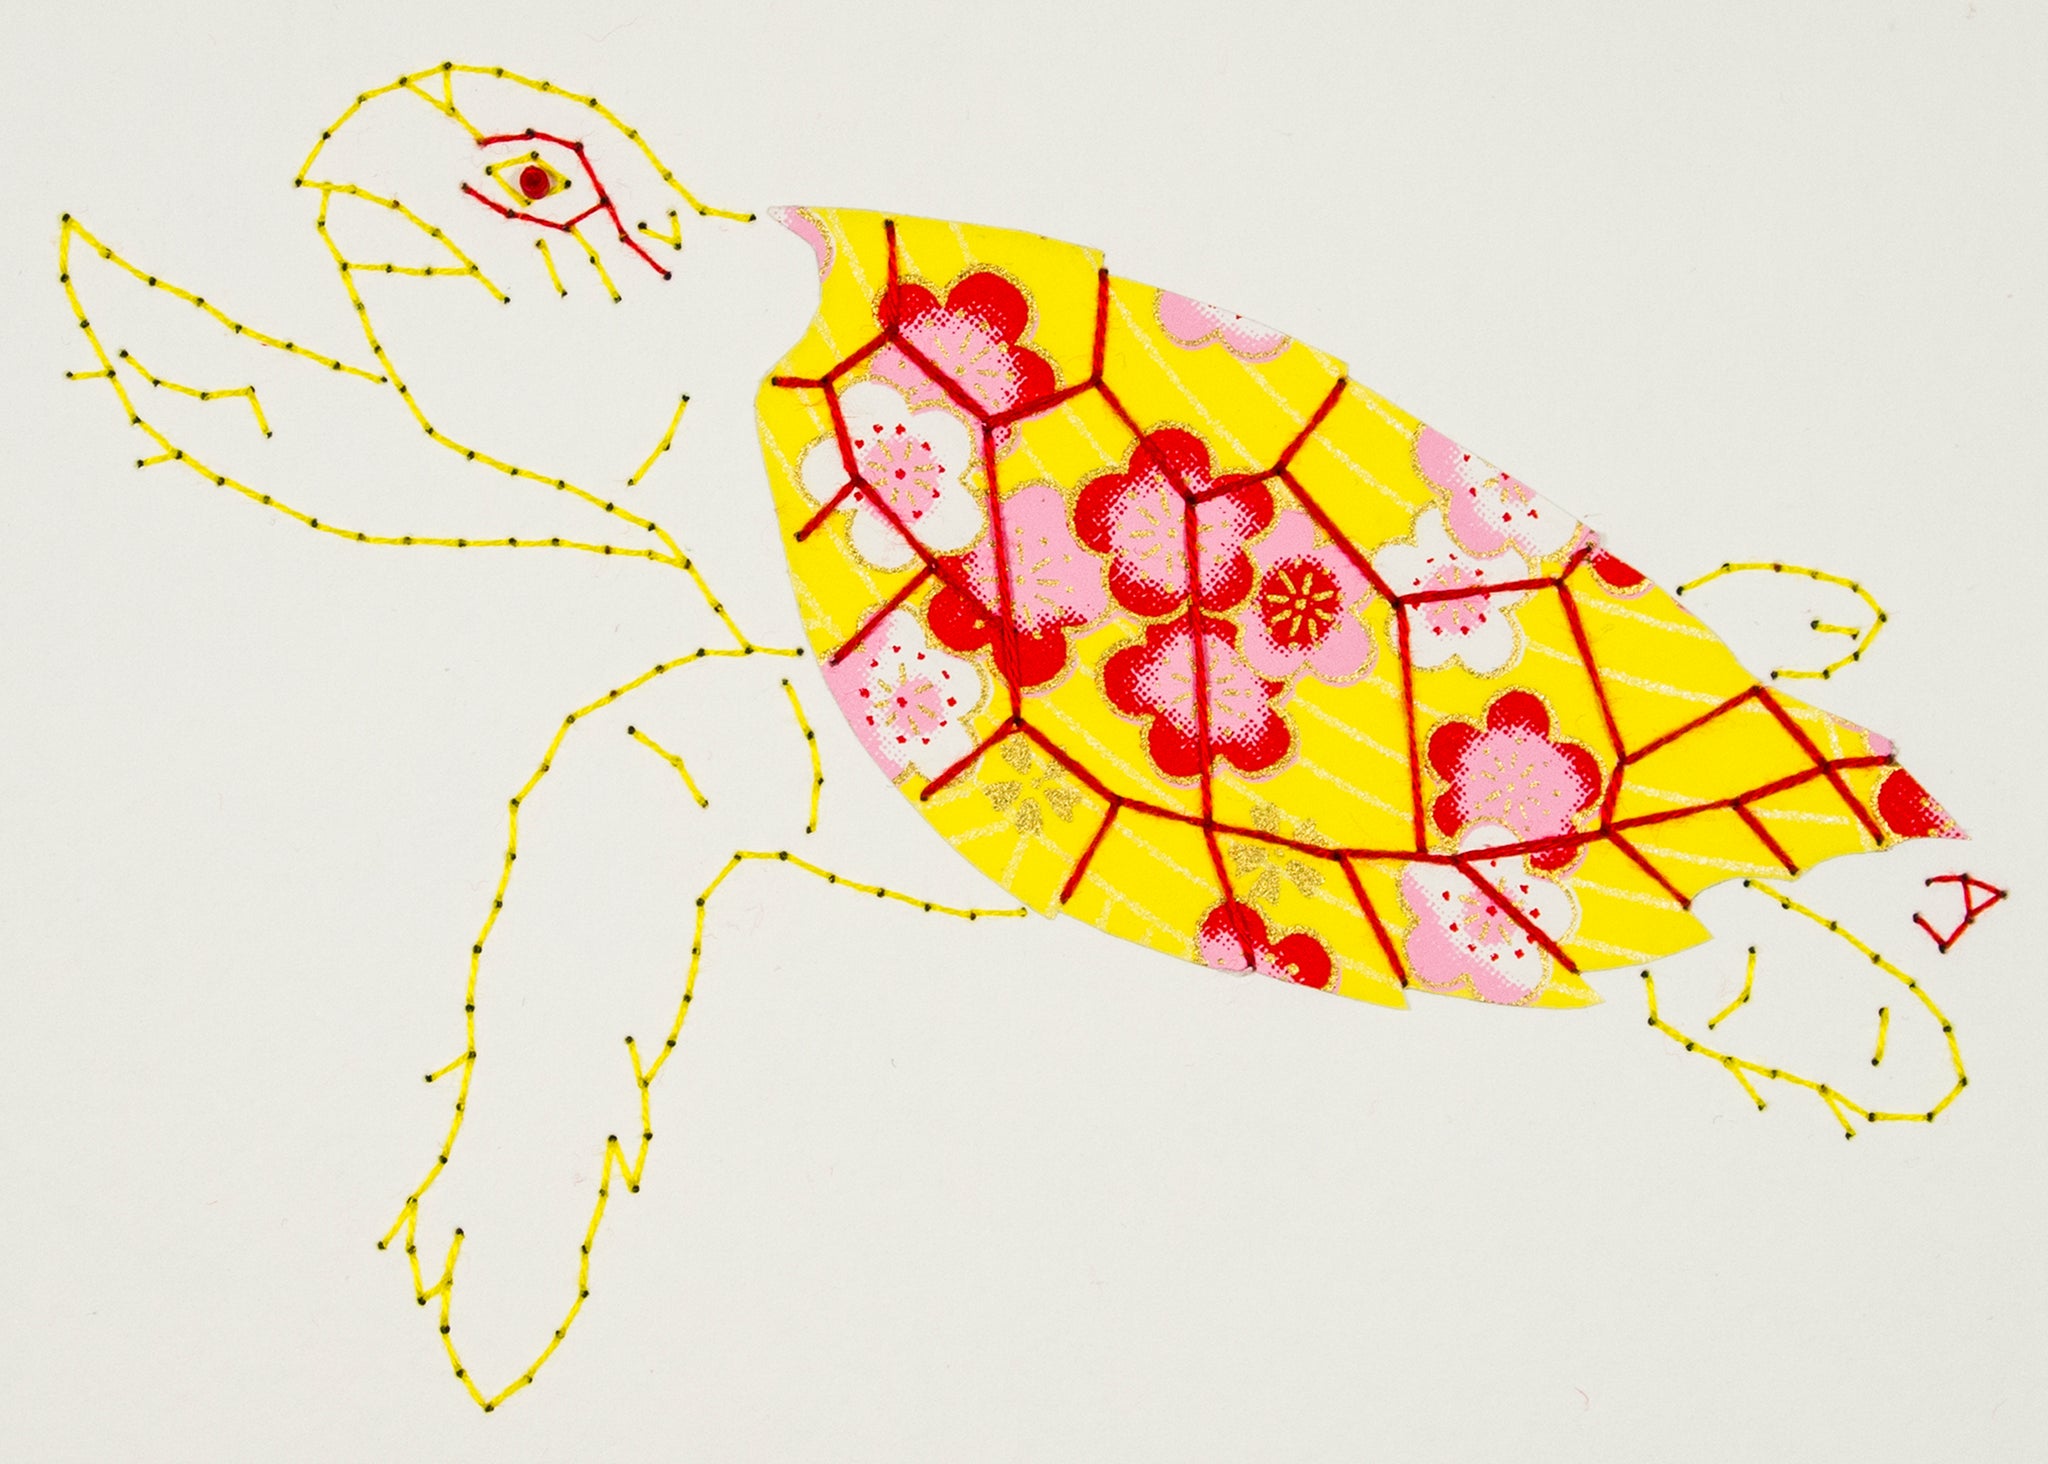 Hawksbill Turtle in Yellow & Red